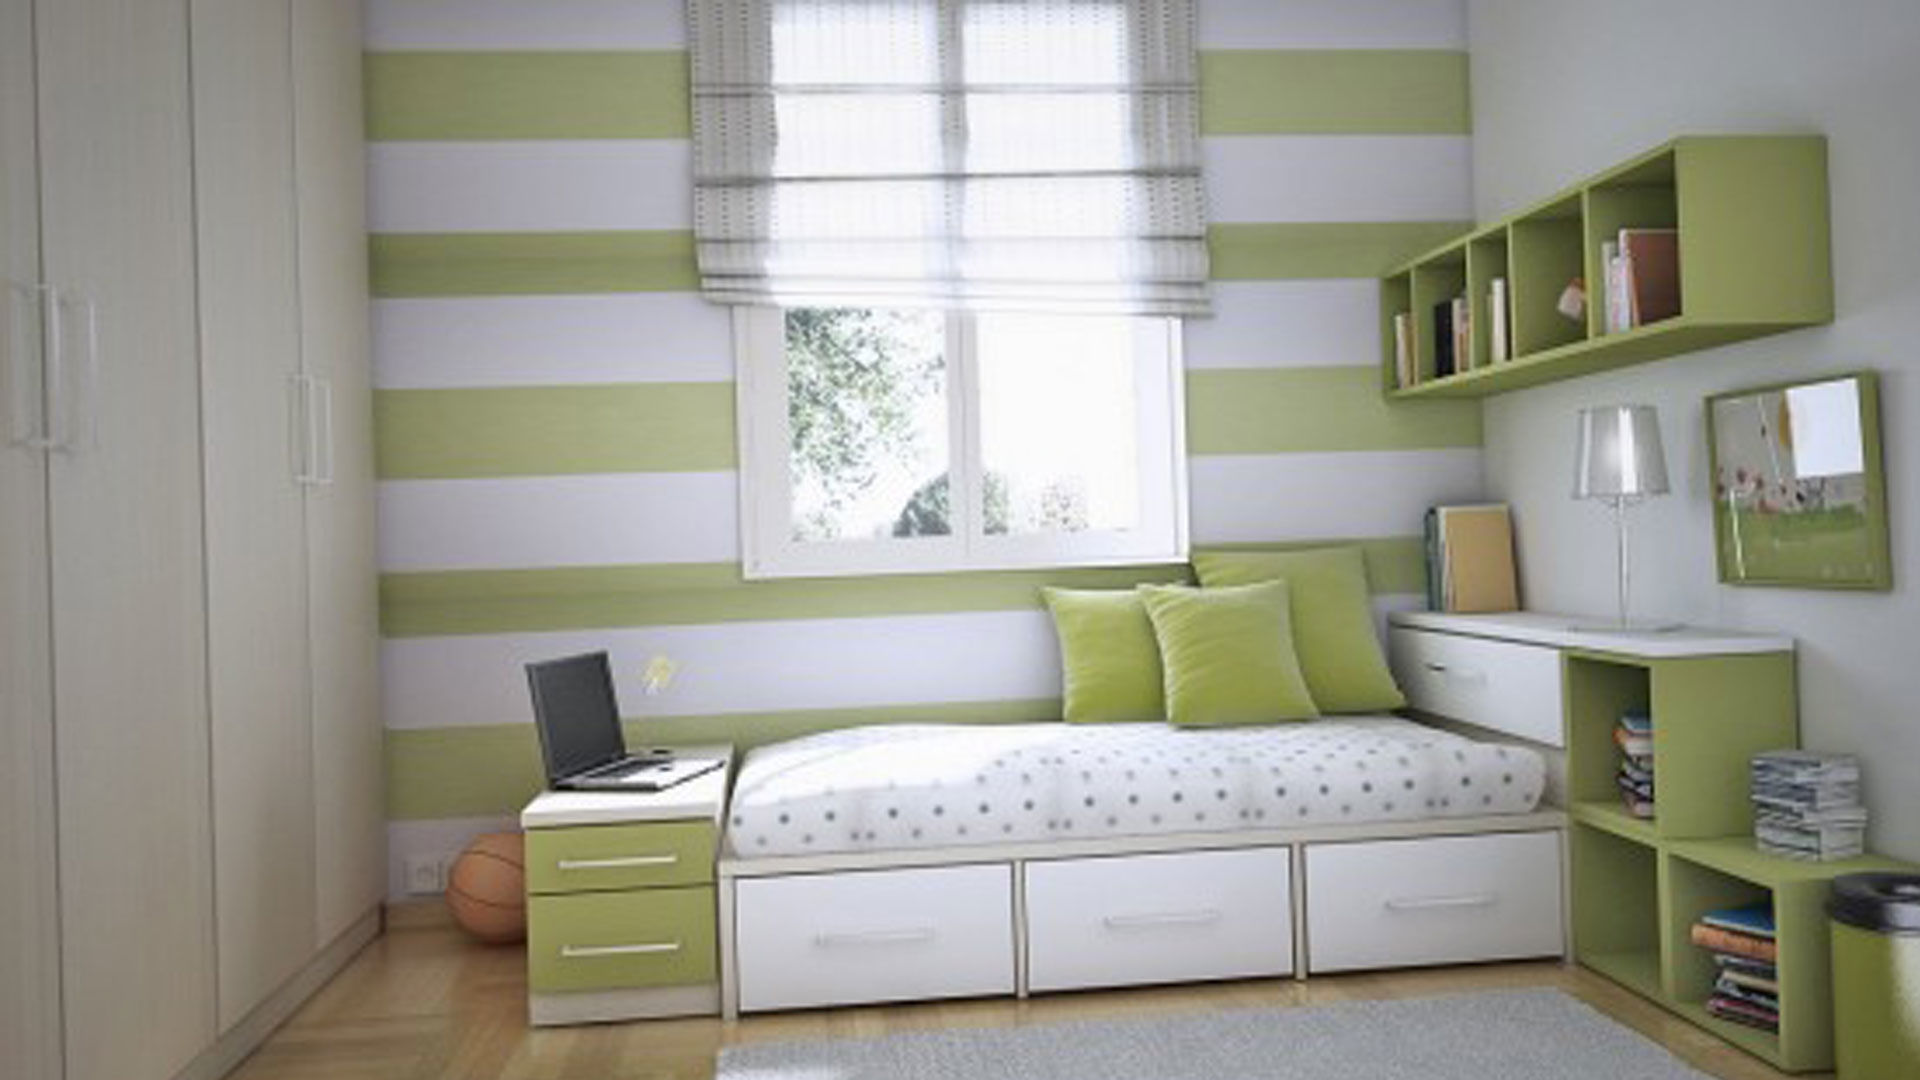 Modern wallpaper ideas for a nursery in warm bed colors